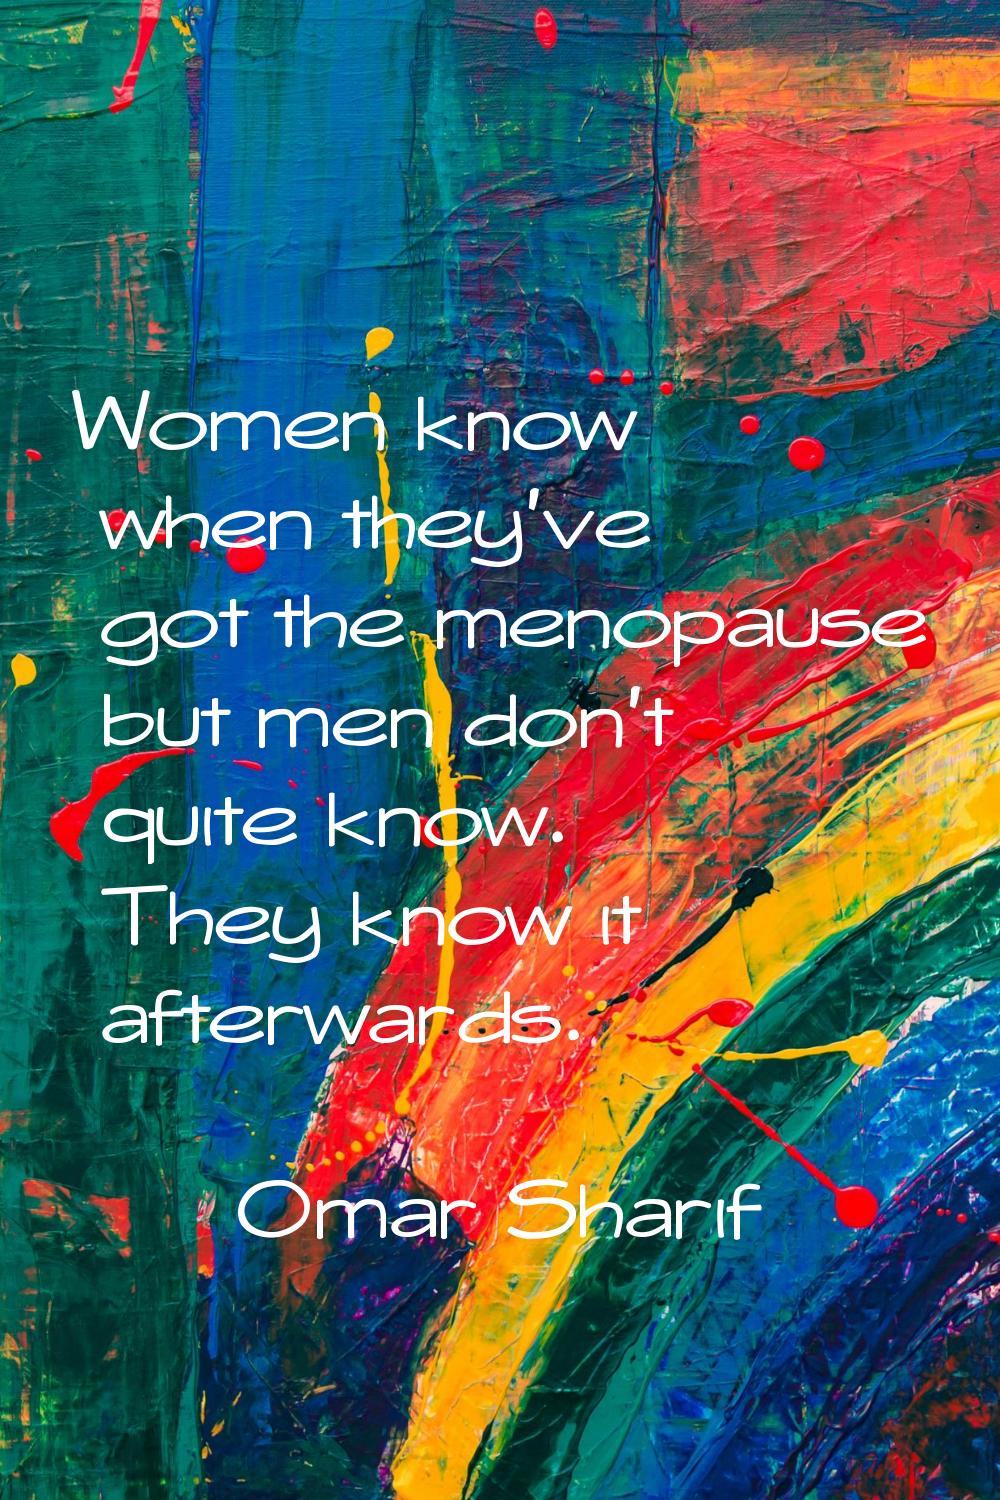 Women know when they've got the menopause but men don't quite know. They know it afterwards.